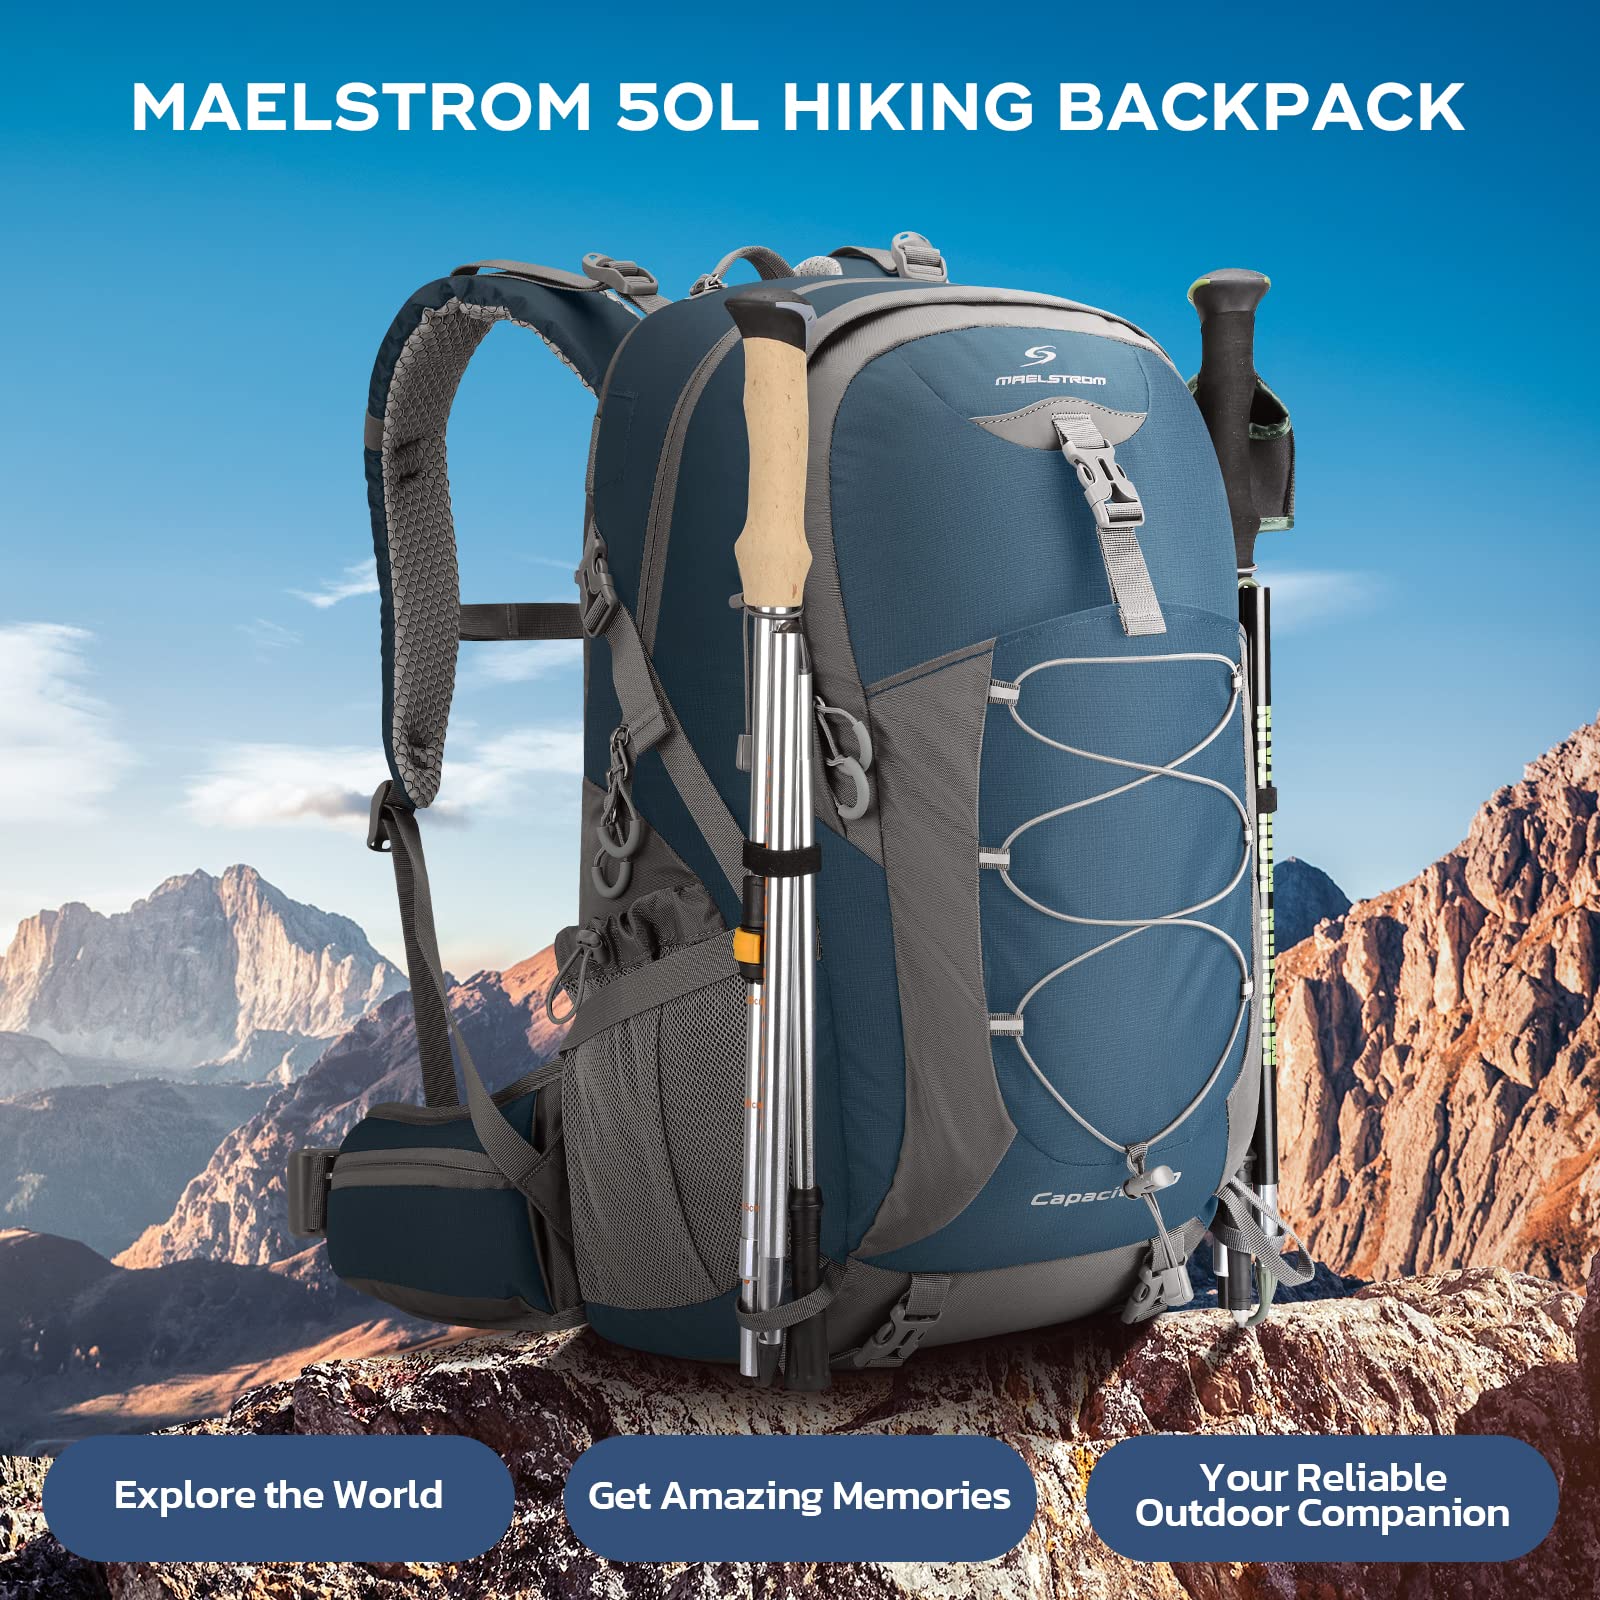 Maelstrom Hiking Backpack,Camping Backpack,40L Waterproof Hiking Daypack with Rain Cover,Lightweight Travel Backpack,Blue